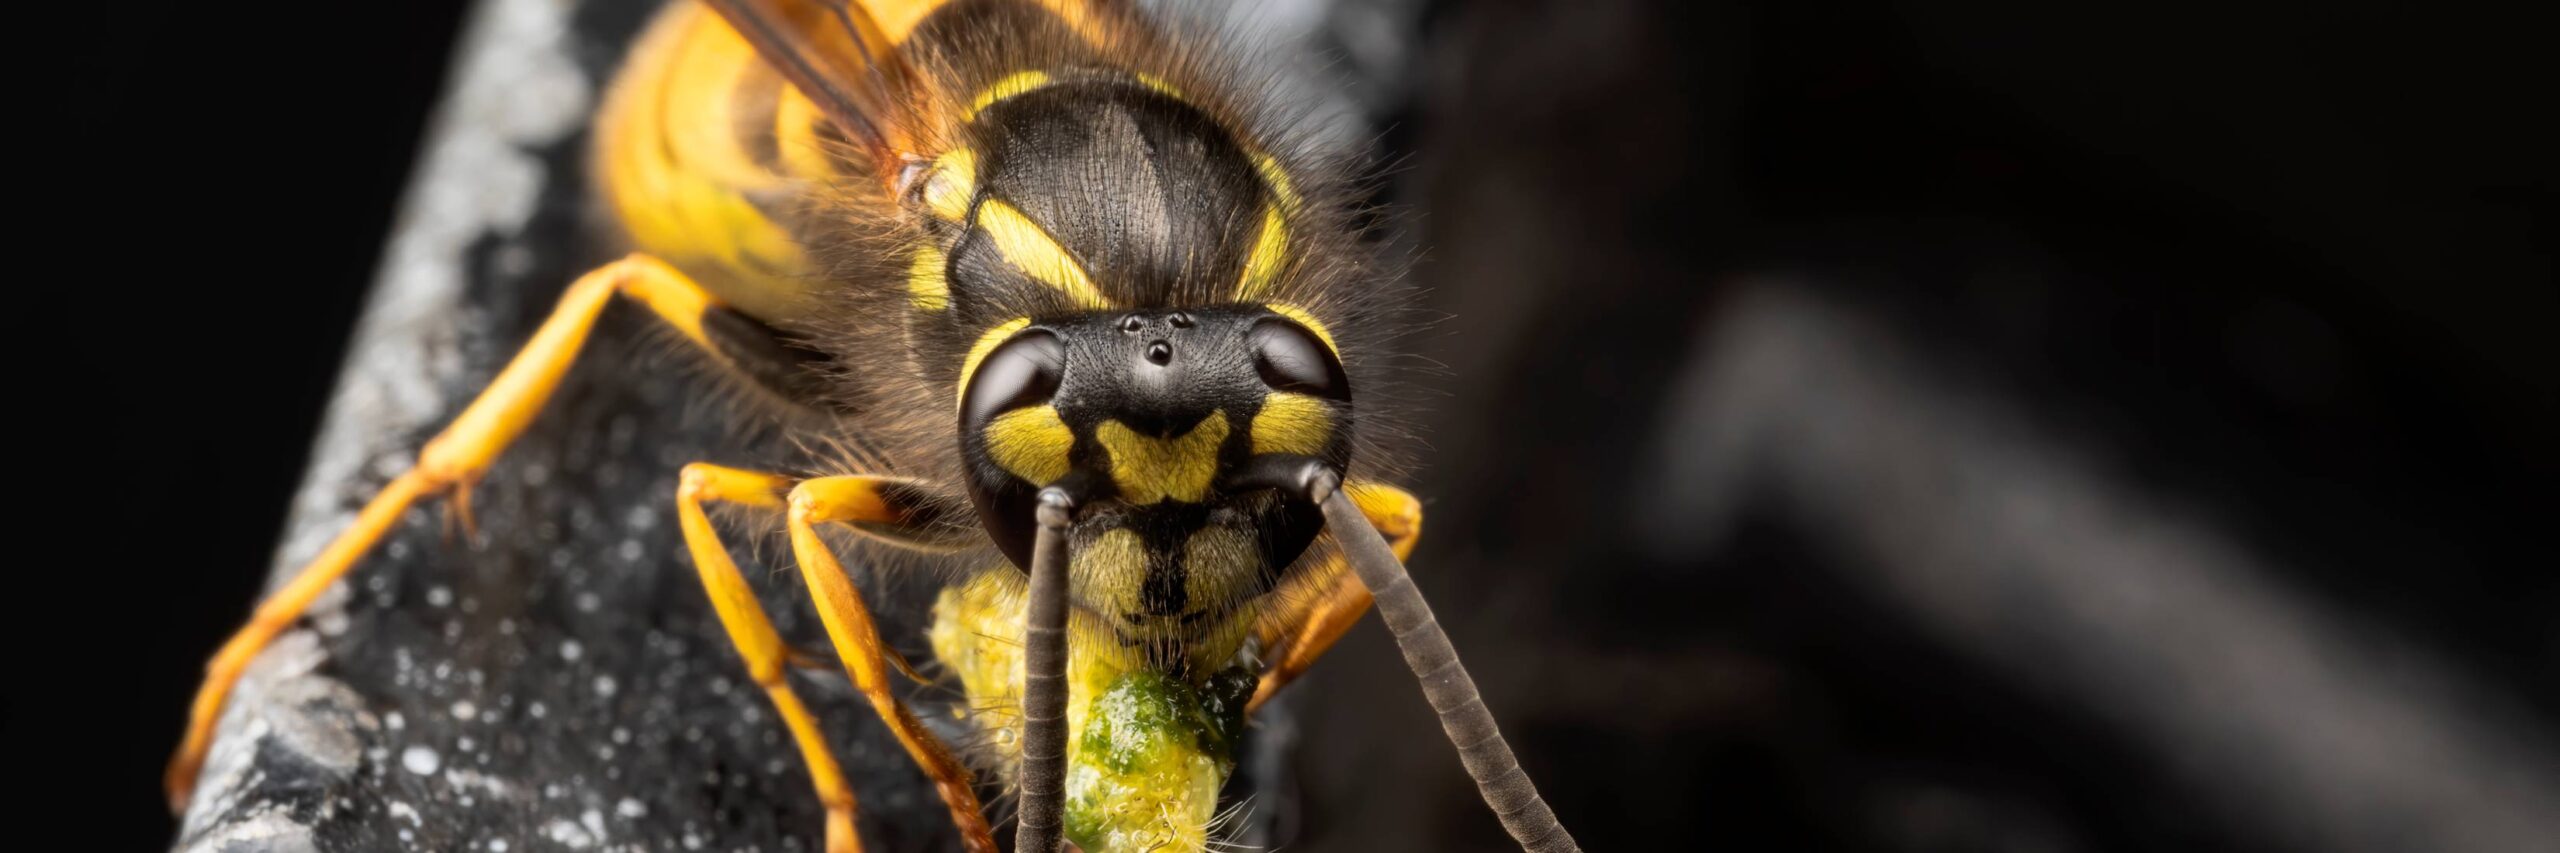 How to Keep Wasps From Infesting Your Car